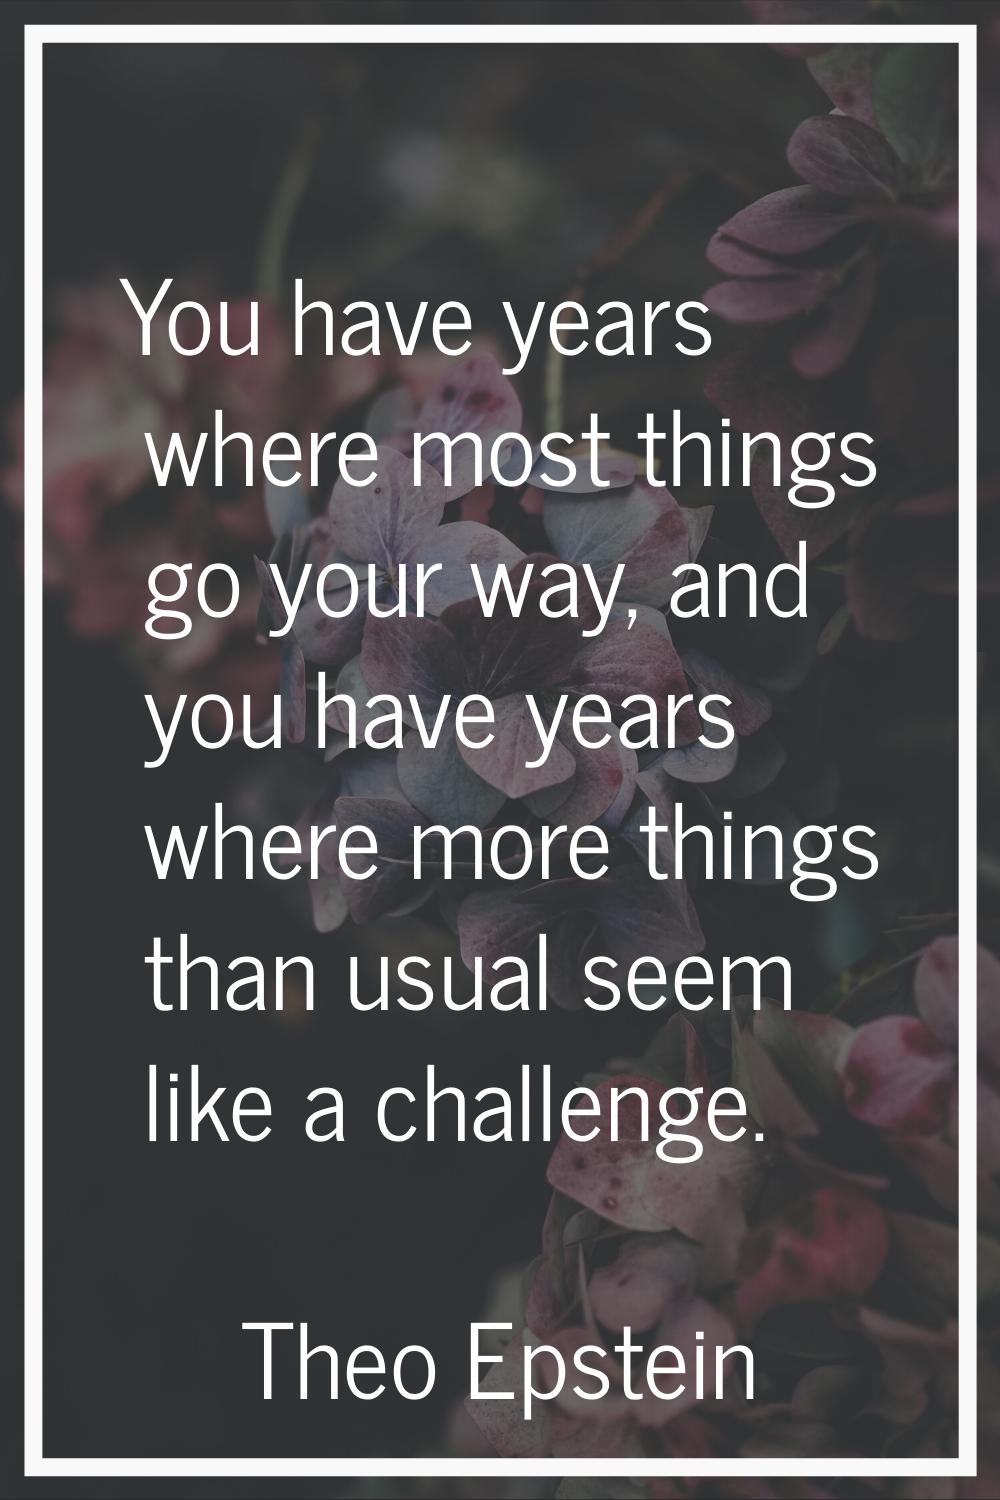 You have years where most things go your way, and you have years where more things than usual seem 